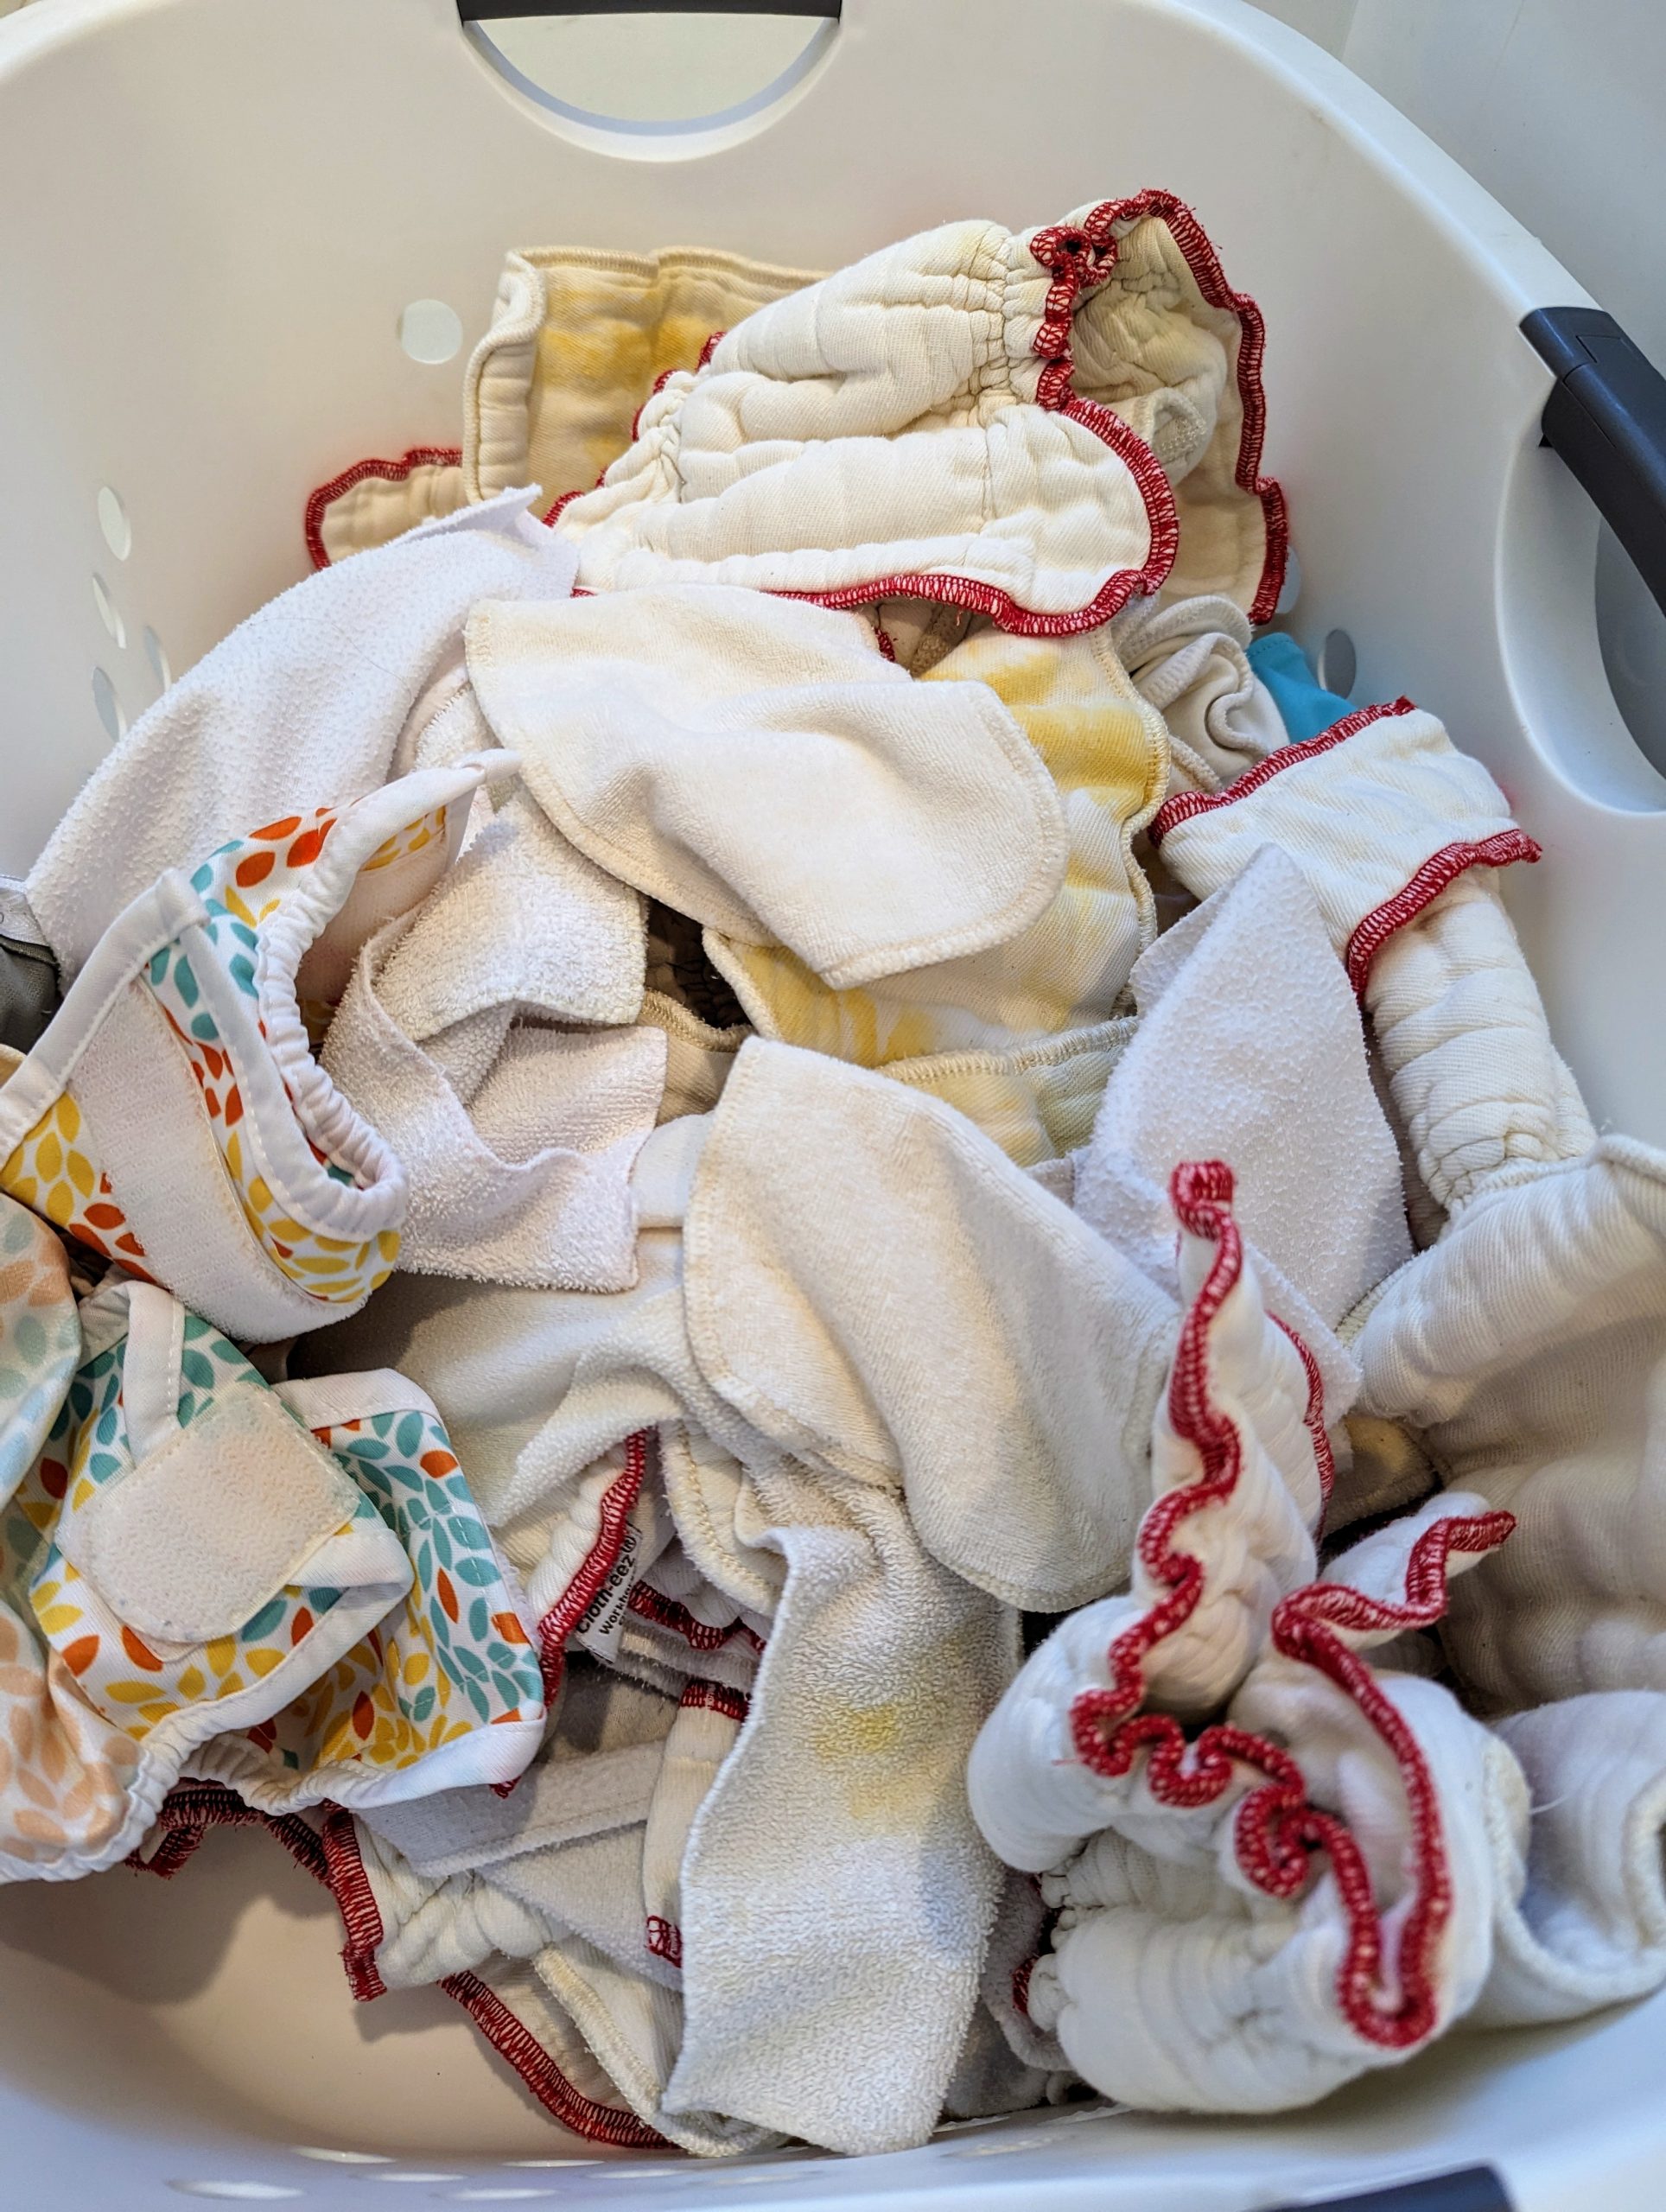 Washing Cloth Diapers: A Simple How to Guide with Steps